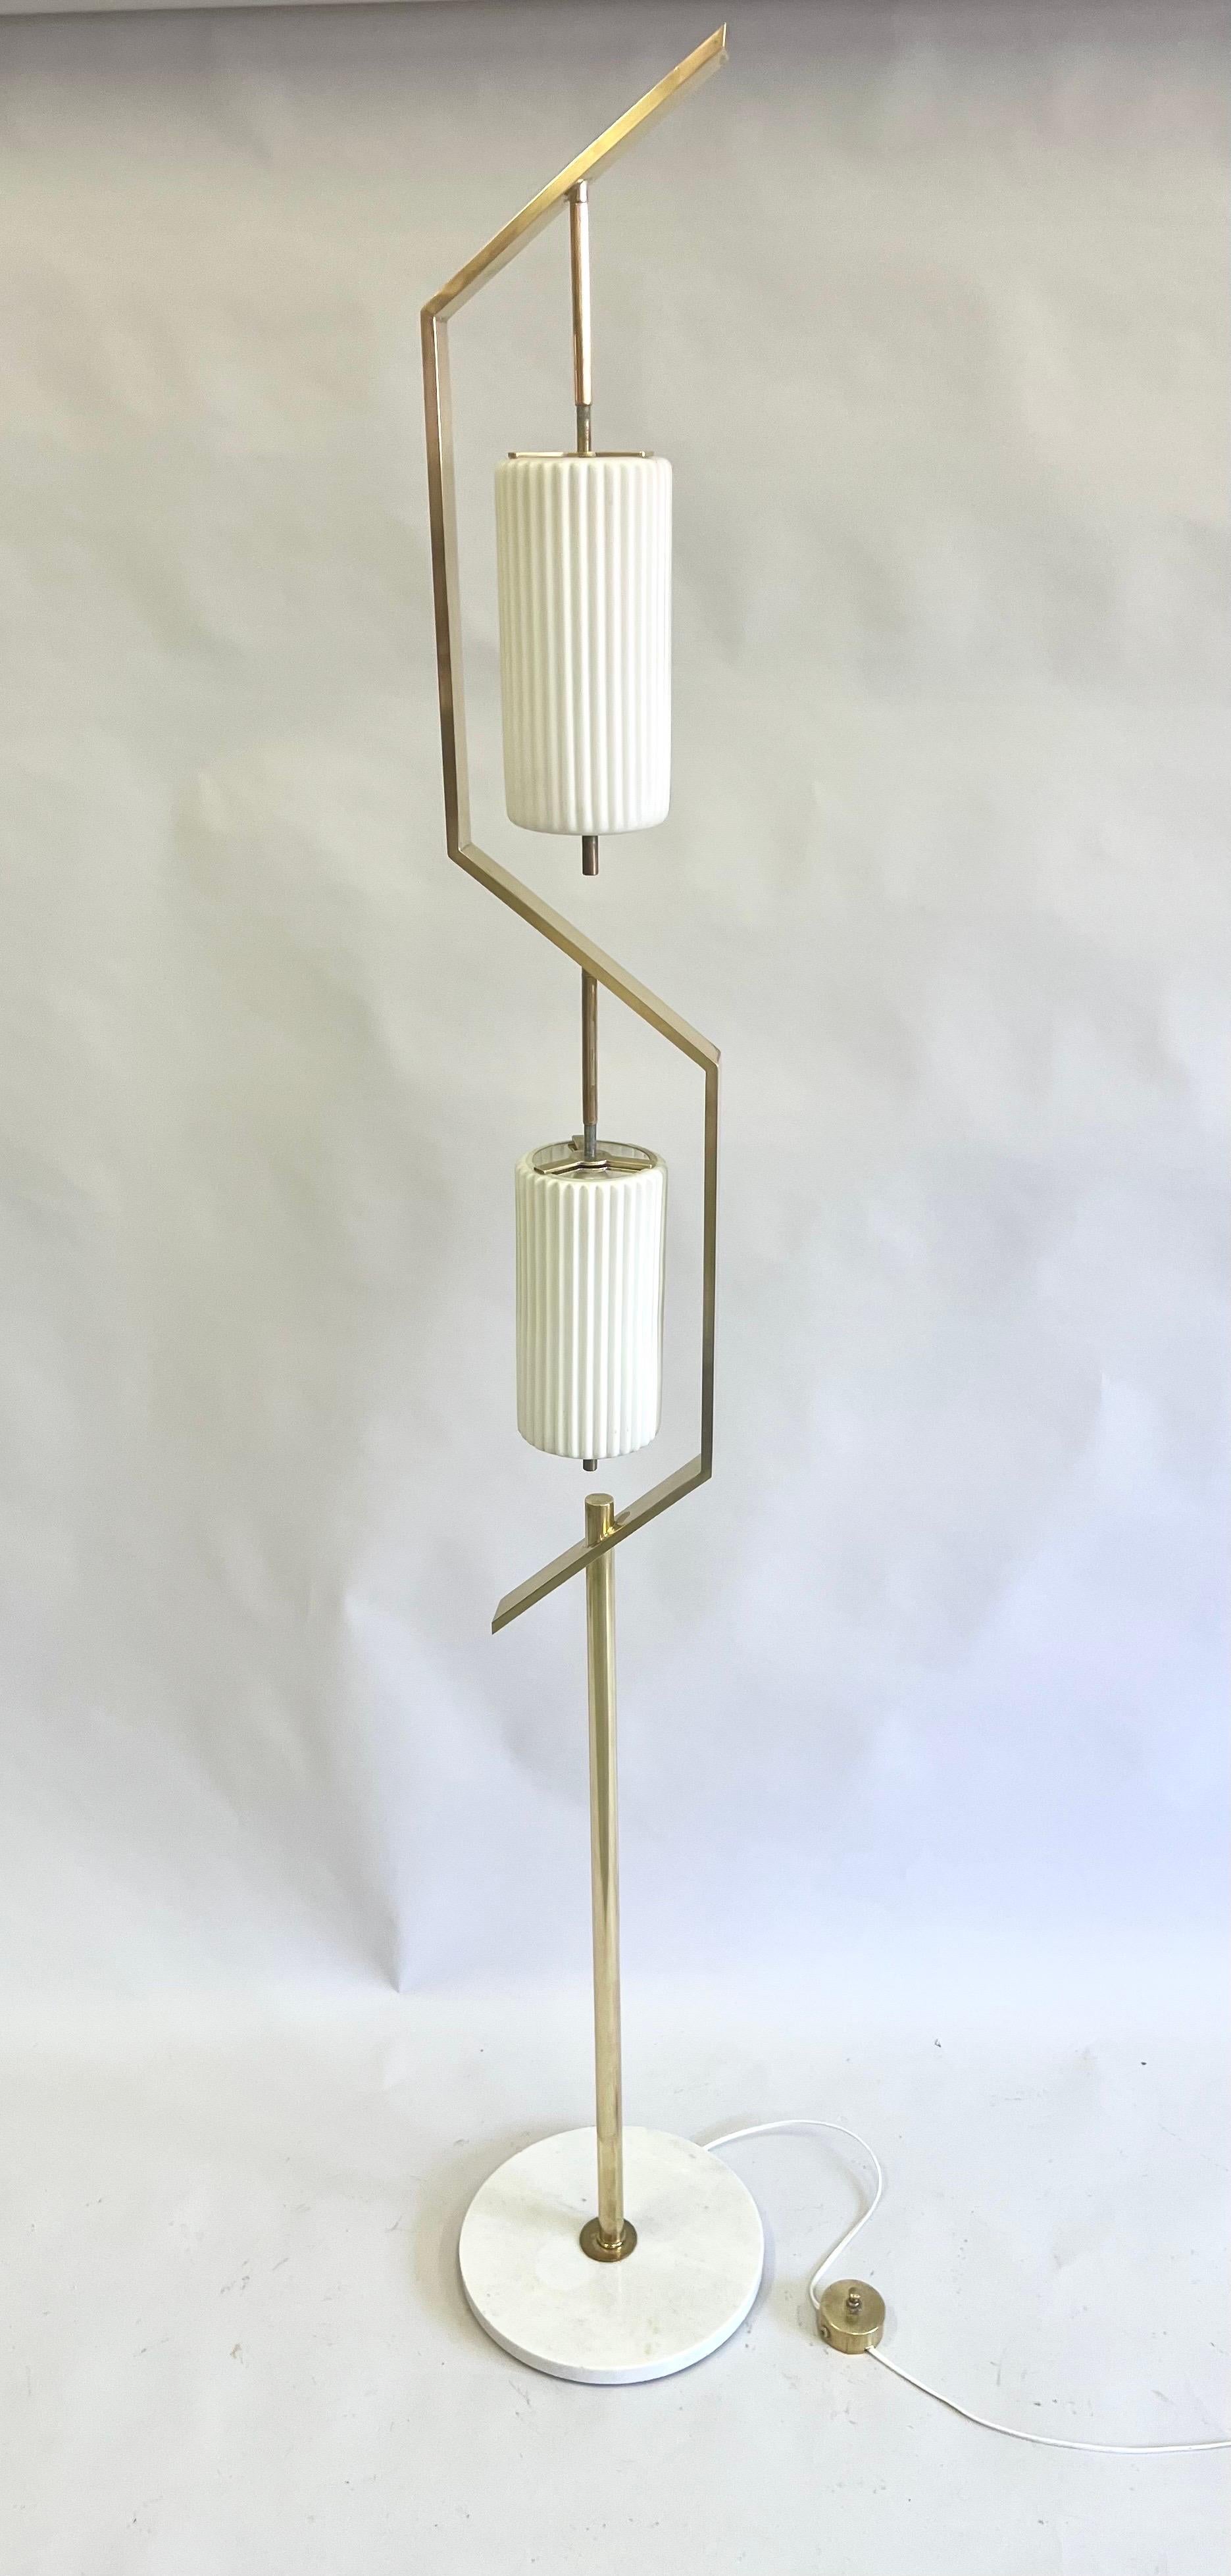 A Rare and Iconic Italian Midcentury Modern Floor Lamp by Angelo Lelli for Arredoluce, Italy, circa 1959. This standing lamp (Cat. #256) is a master work of sculpture and materials. The modern angular brass stem is in counter-balance to itself. This